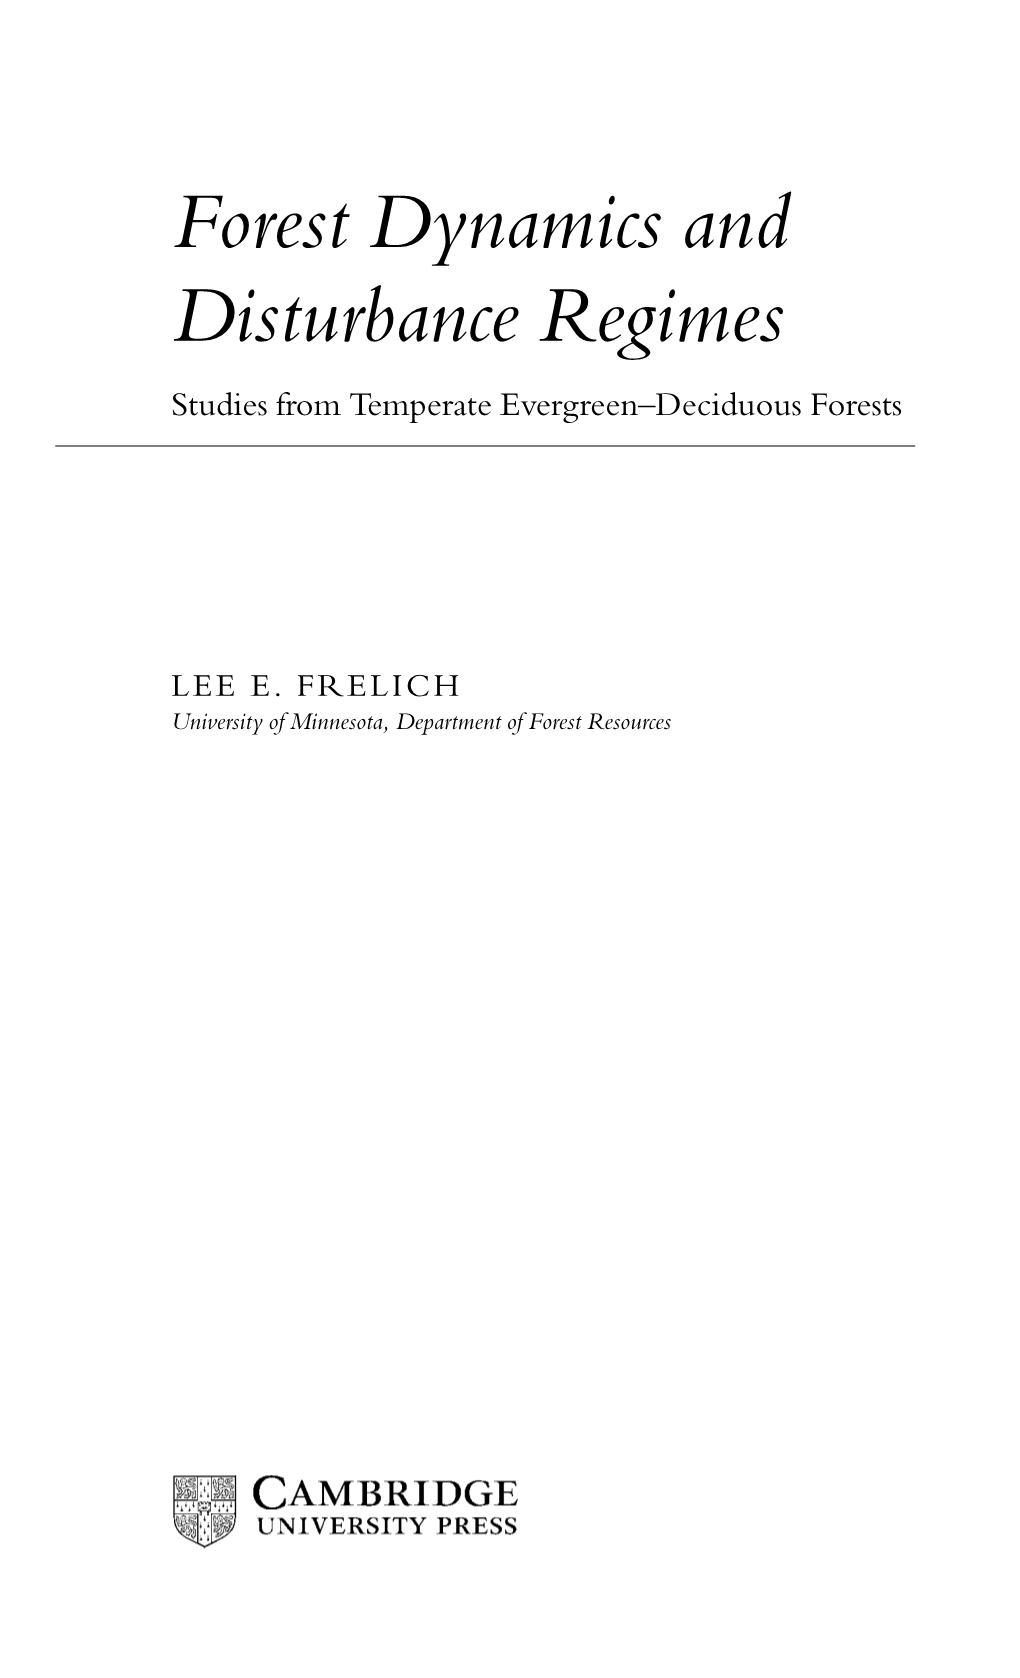 Forest Dynamics and Disturbance Regimes Studies from Temperate Evergreen–Deciduous Forests